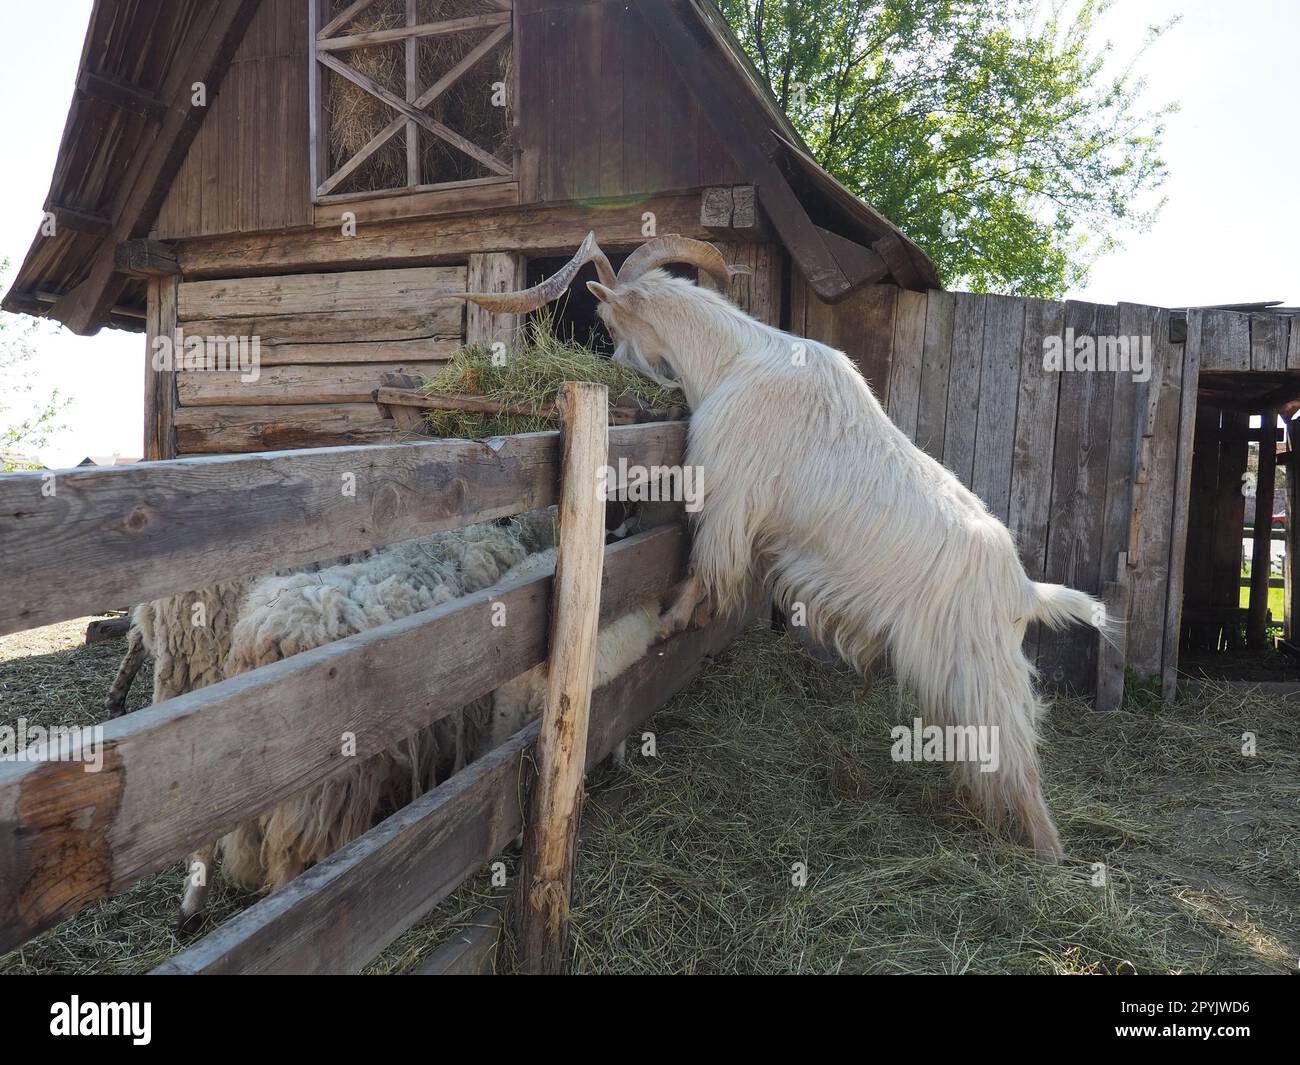 The domestic goat is Capra hircus, a species of artiodactyls from the genus Capra mountain goats of the bovine family. The goat stands on its hind hooves and eats hay over a wooden fence. Sheep graze Stock Photo